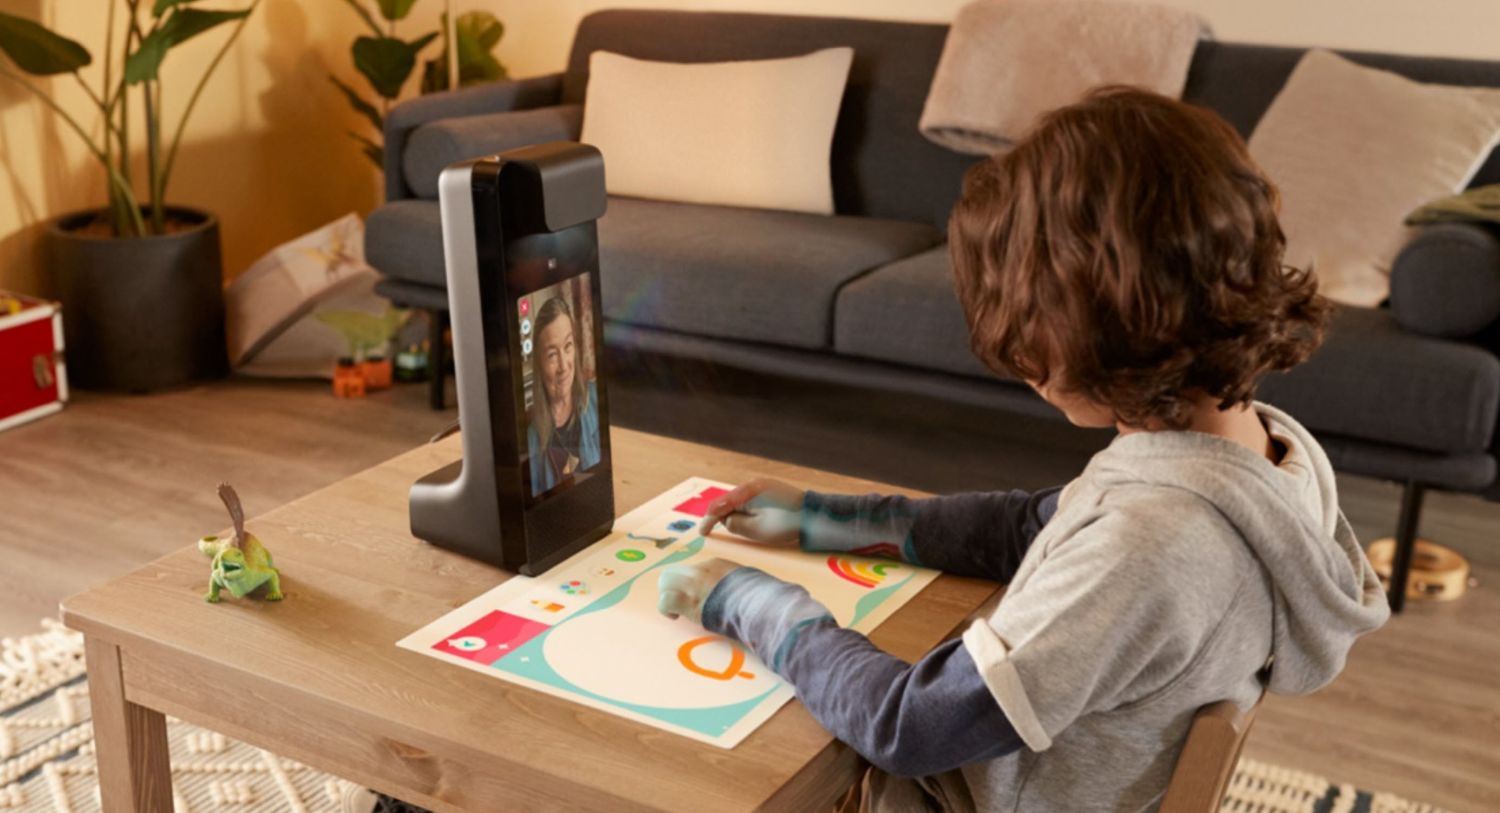 Amazon Glow is a combination of an interactive children's projector and a video call camera thumbnail